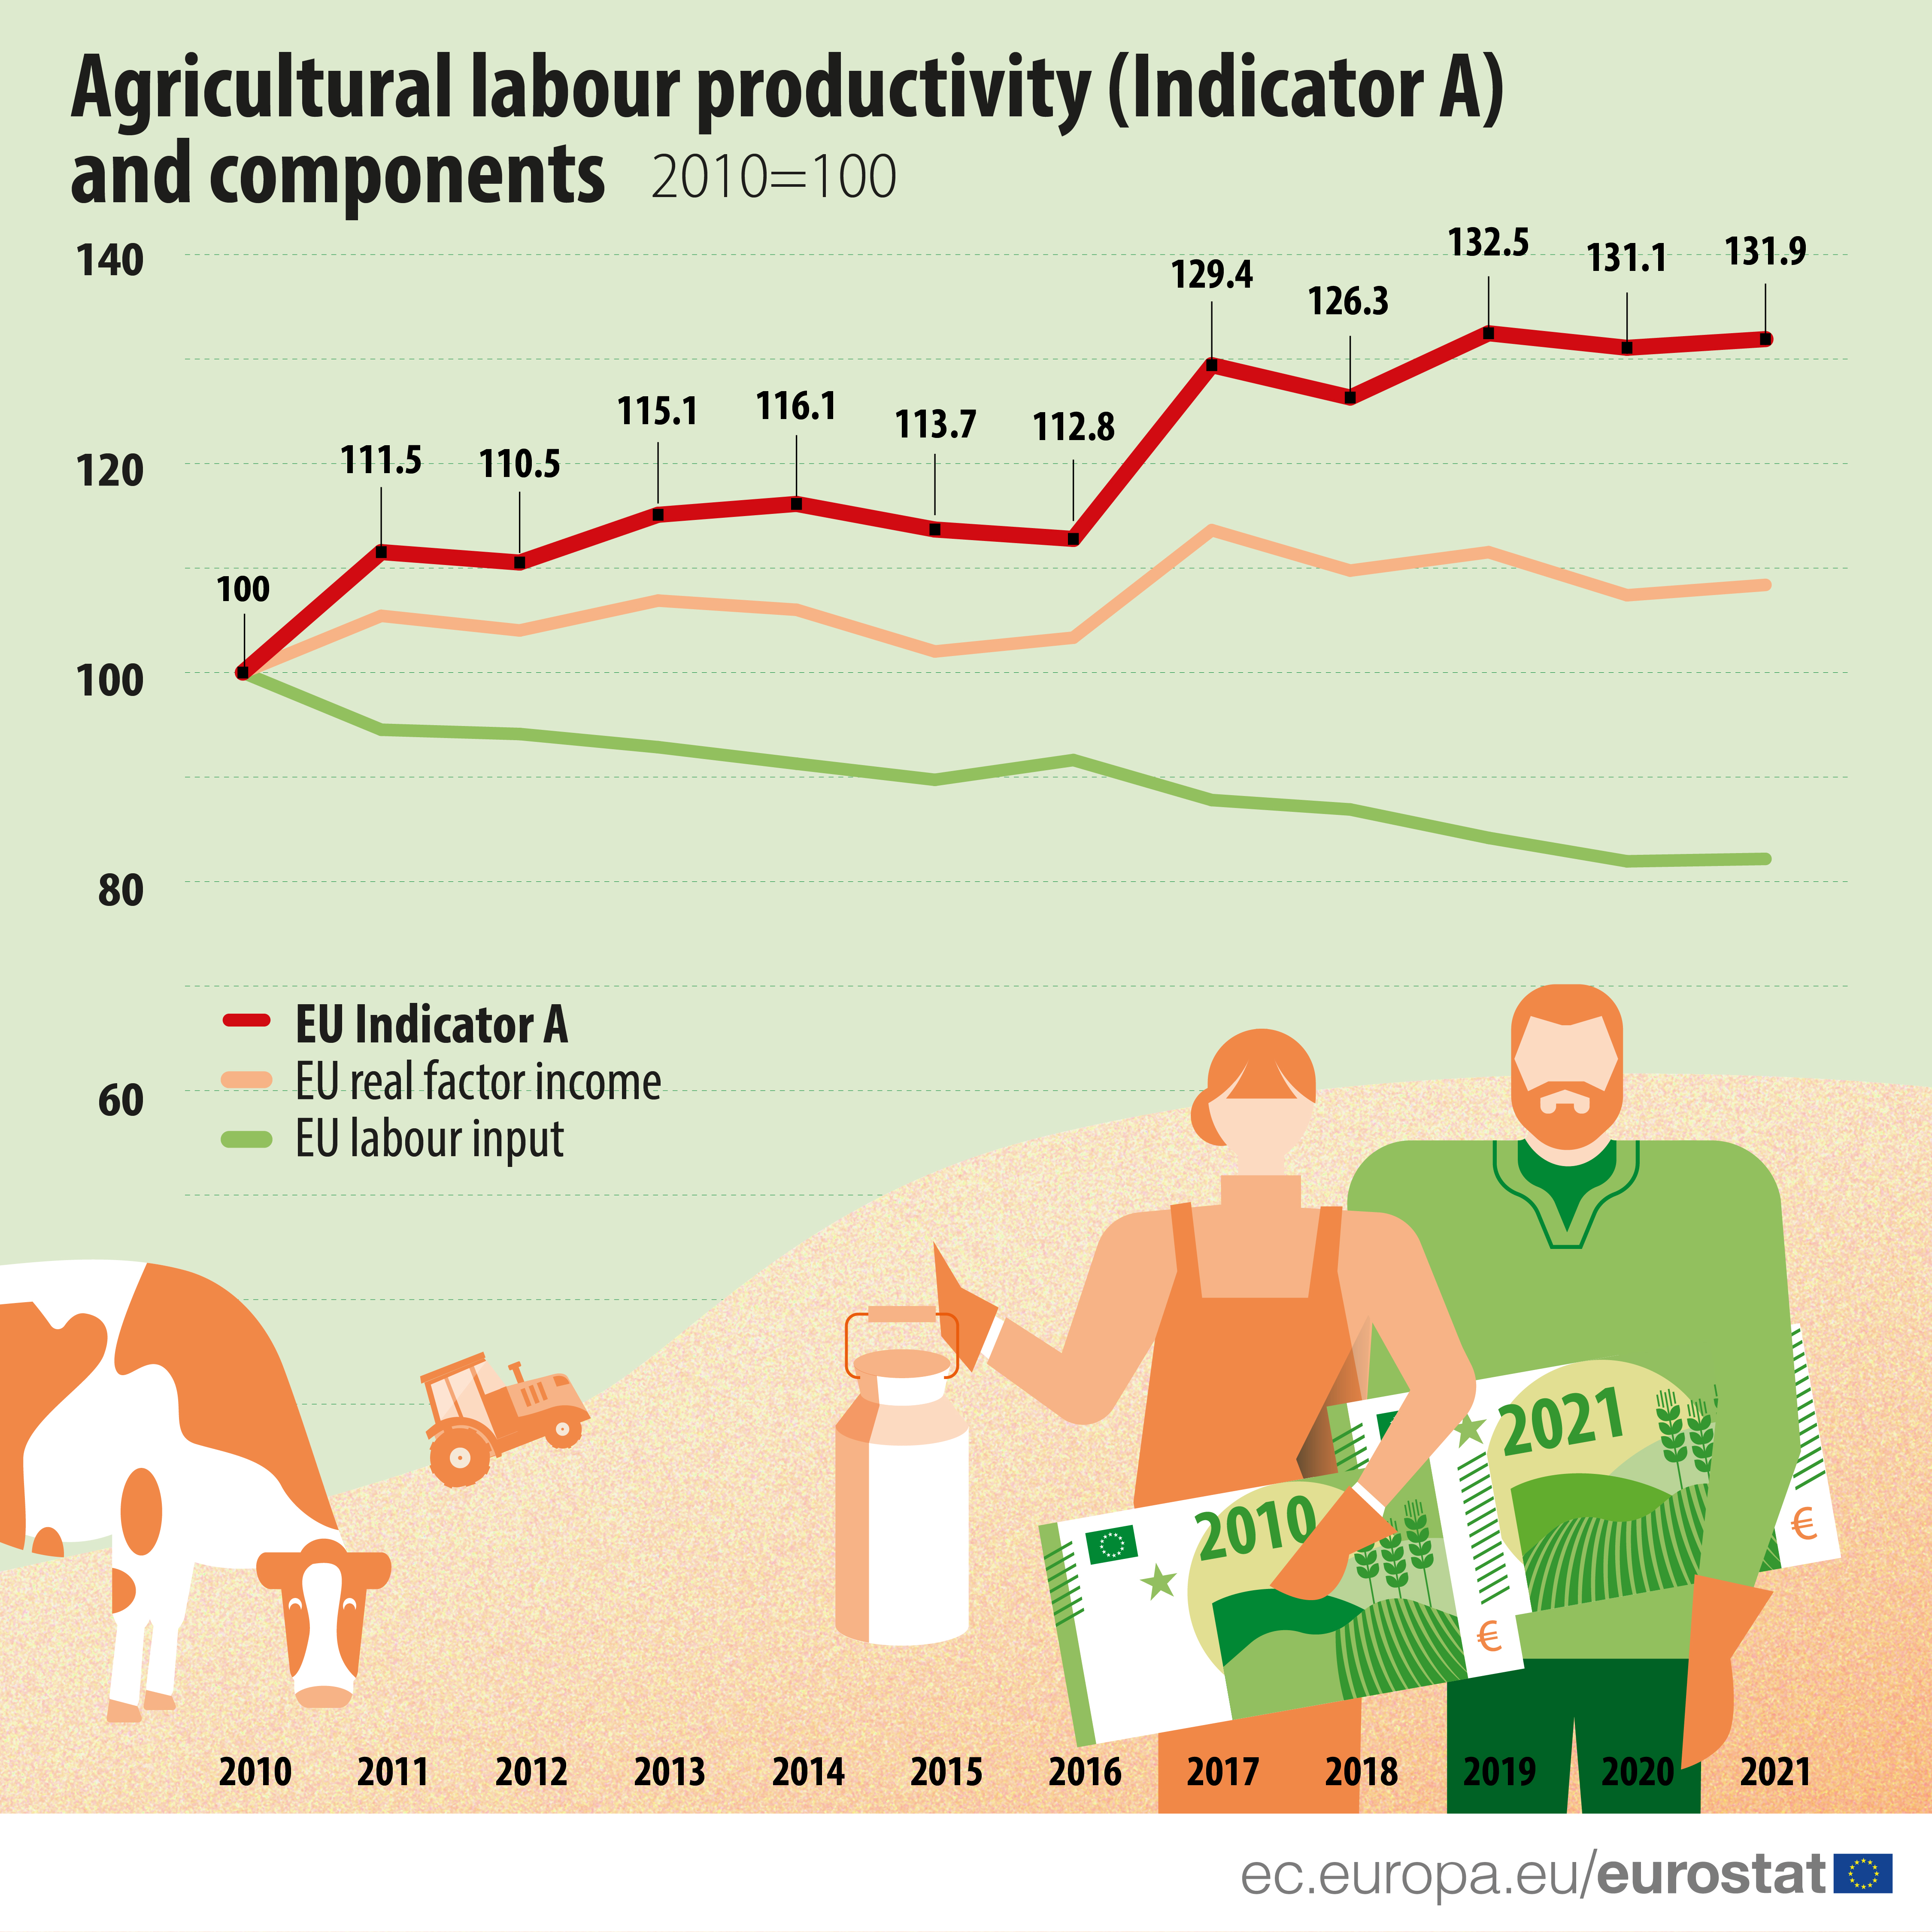 Timeline: Agricultural labour productivity and componentes, 2010-2020